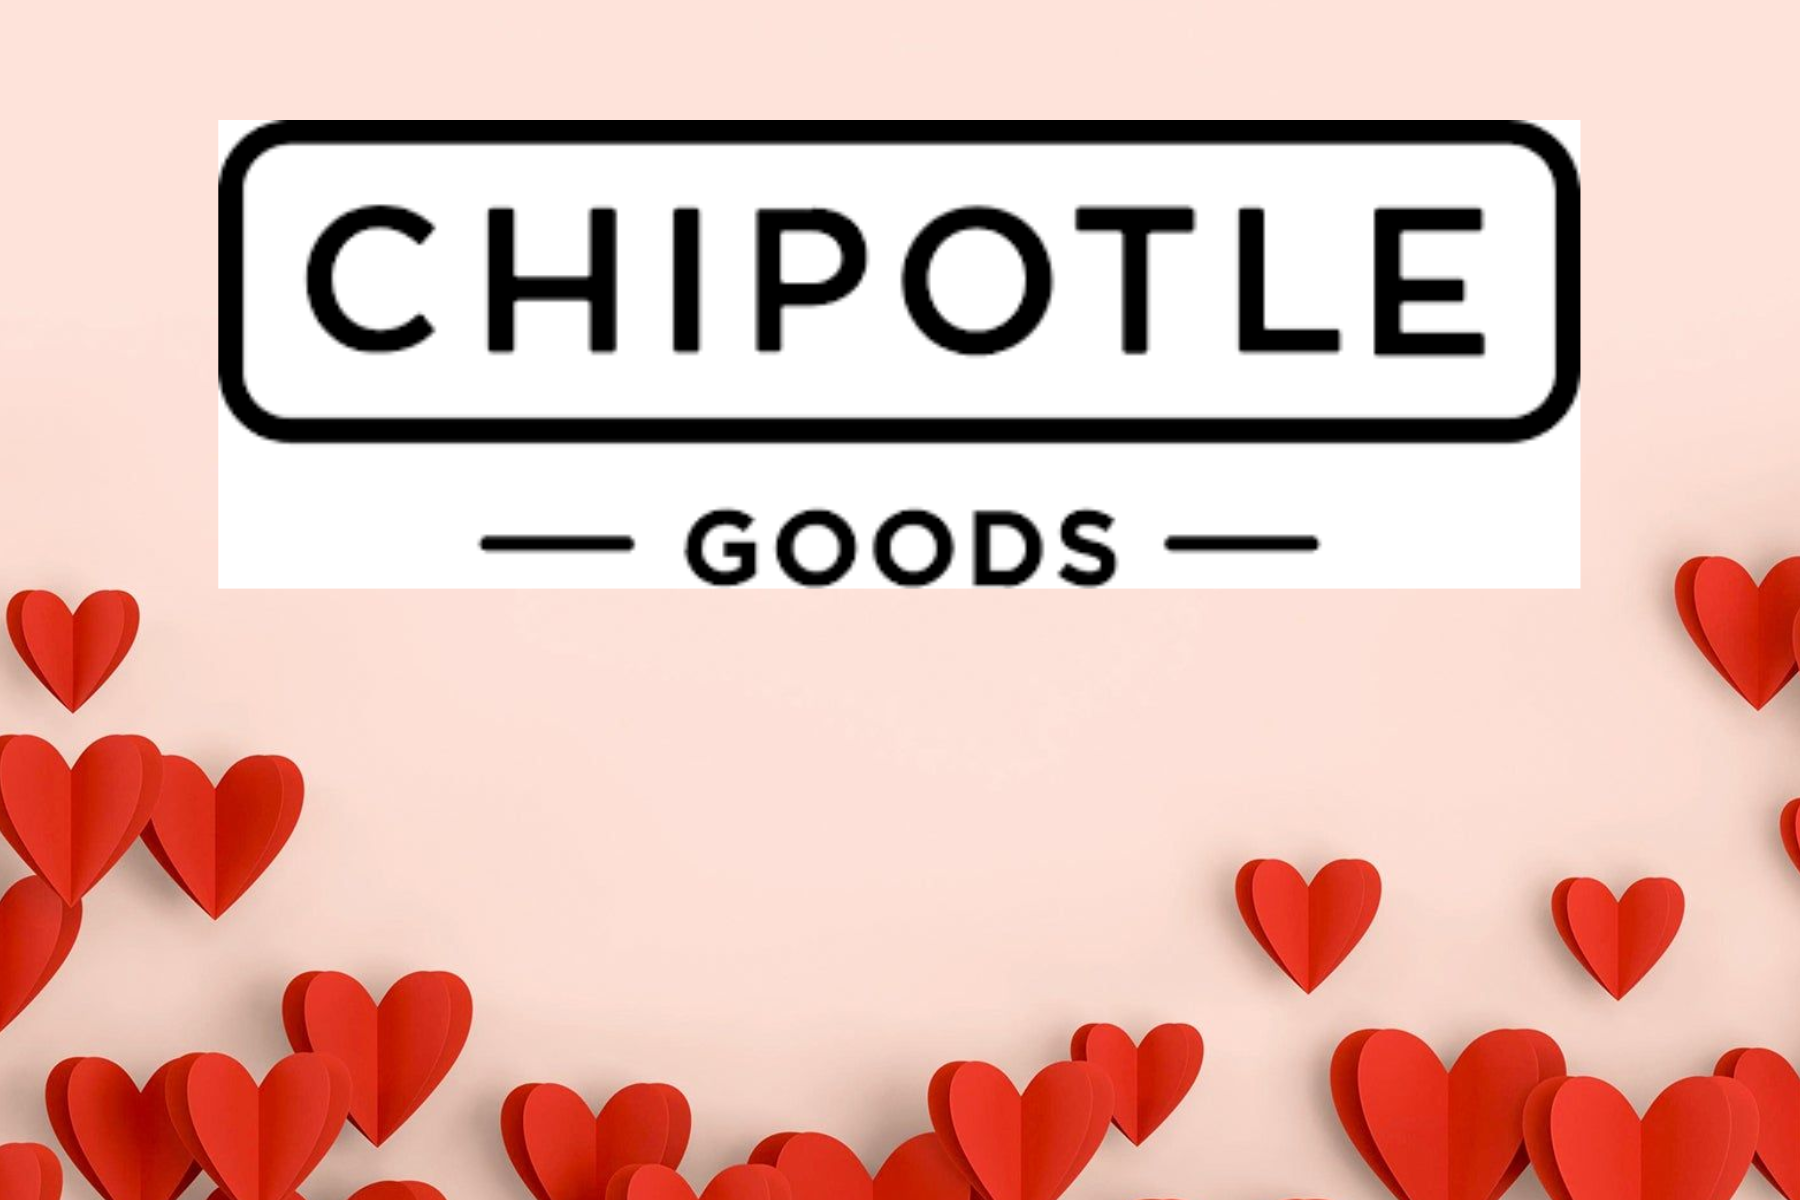 The Logo of Chipotle Goods